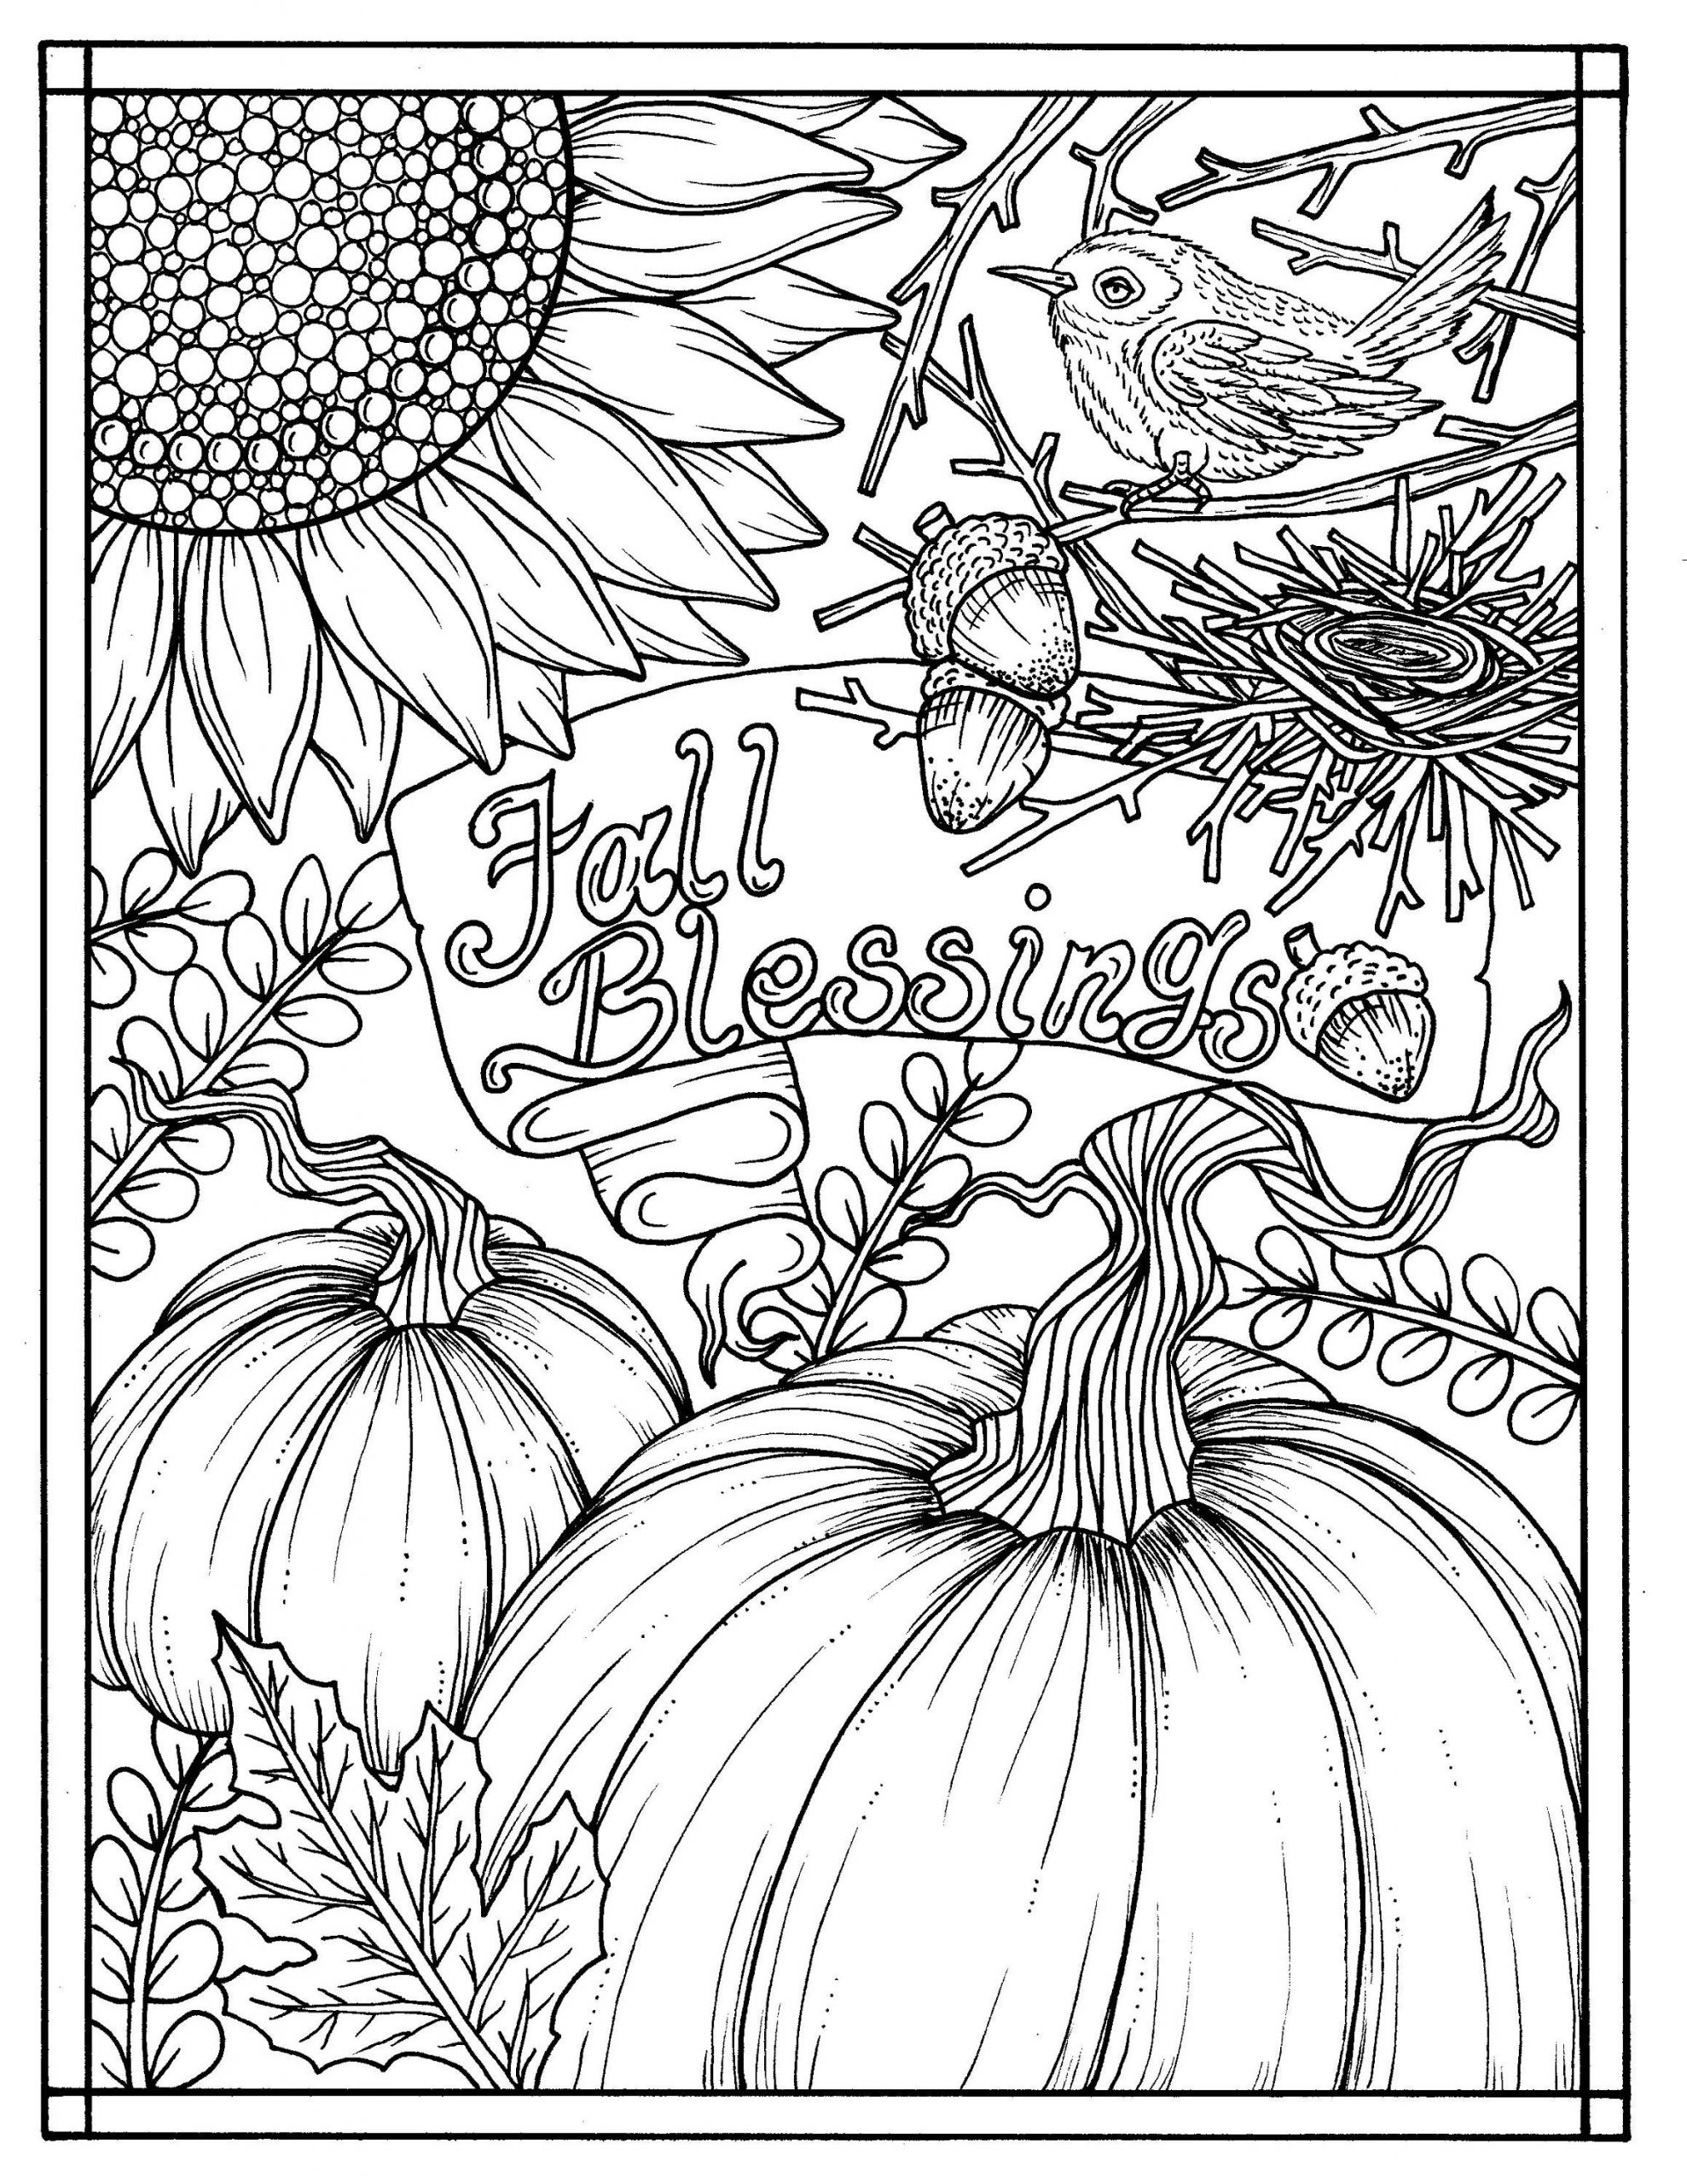 Fall Coloring Pages Adults
 Download Fall Blessings Instant digital Coloring page